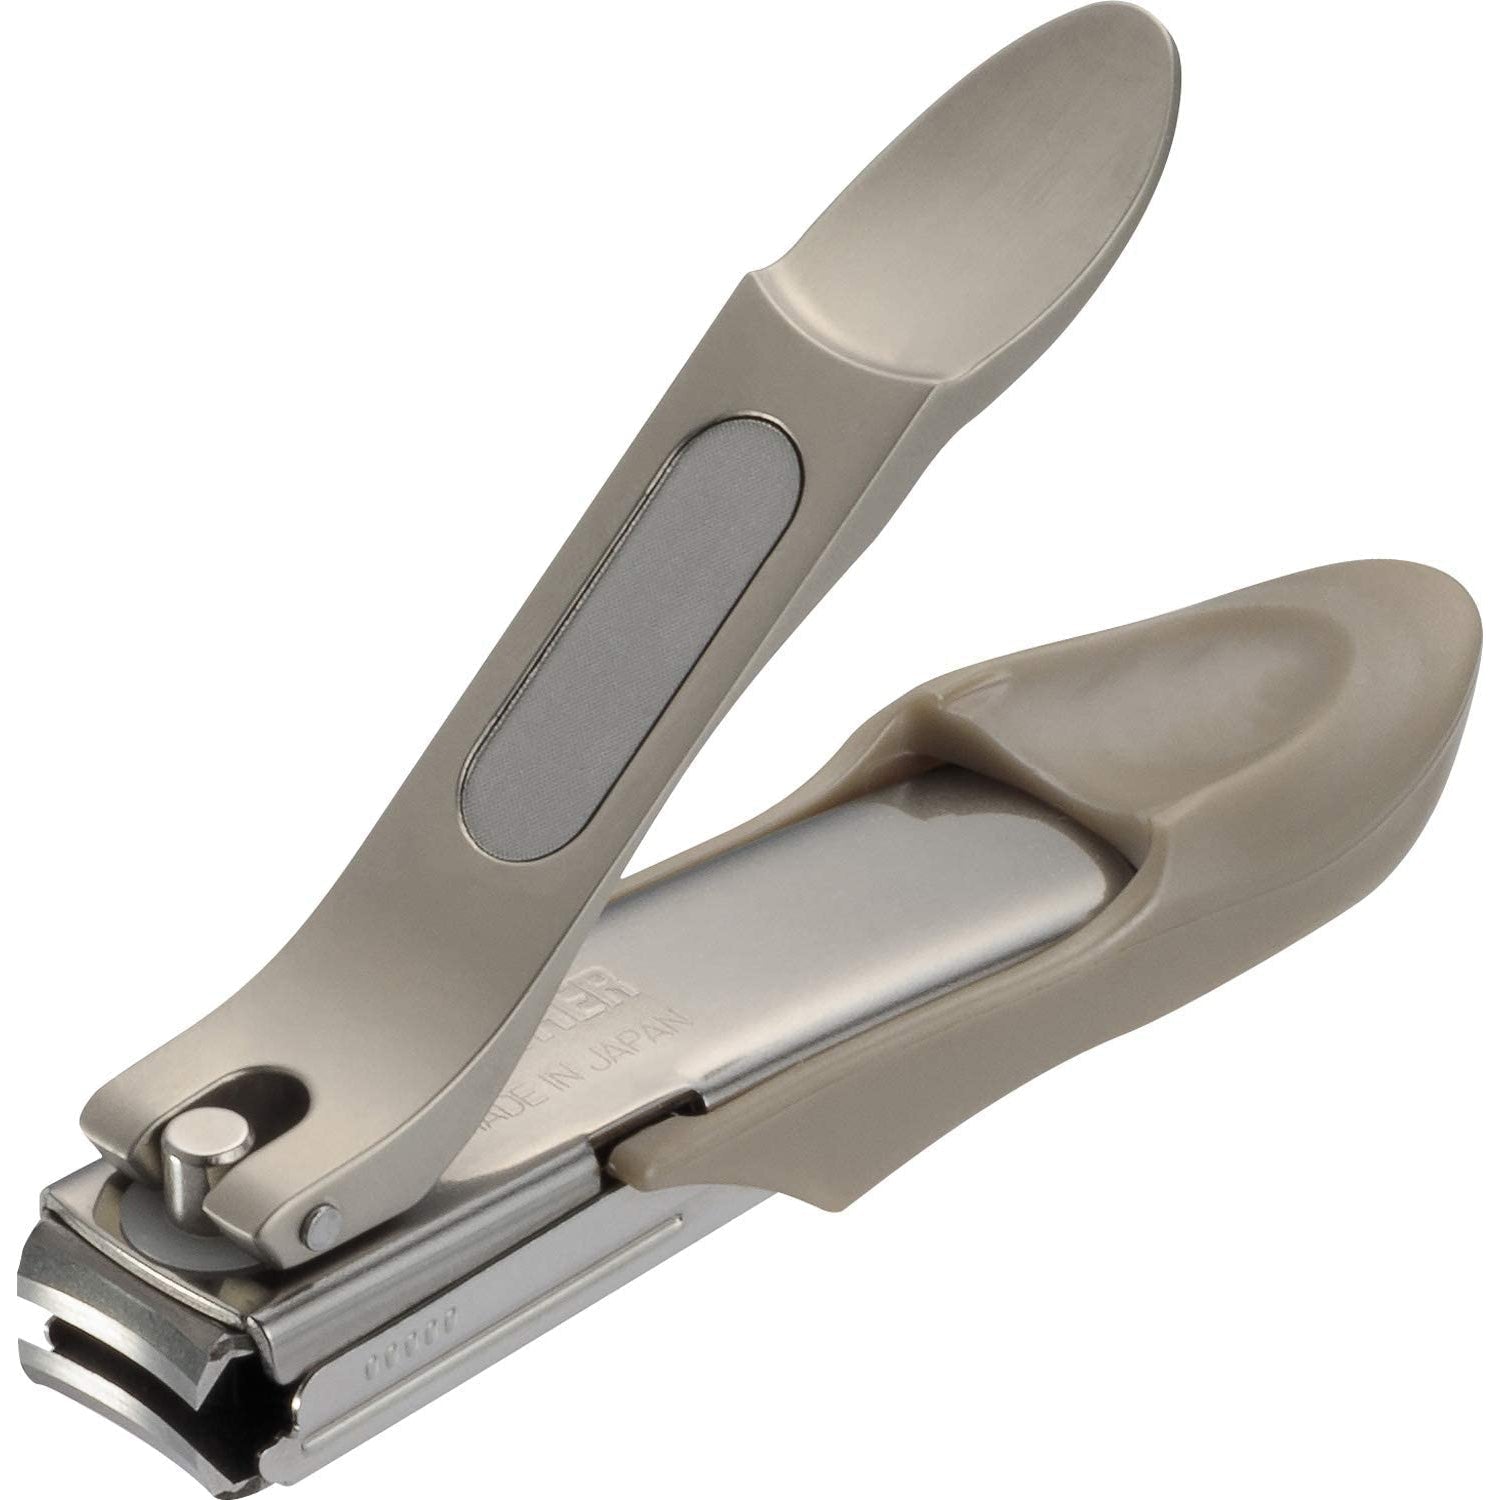 Pigeon 15107 Baby Nail Clippers in Vijayawada at best price by Apollo  Pharmacy - Justdial